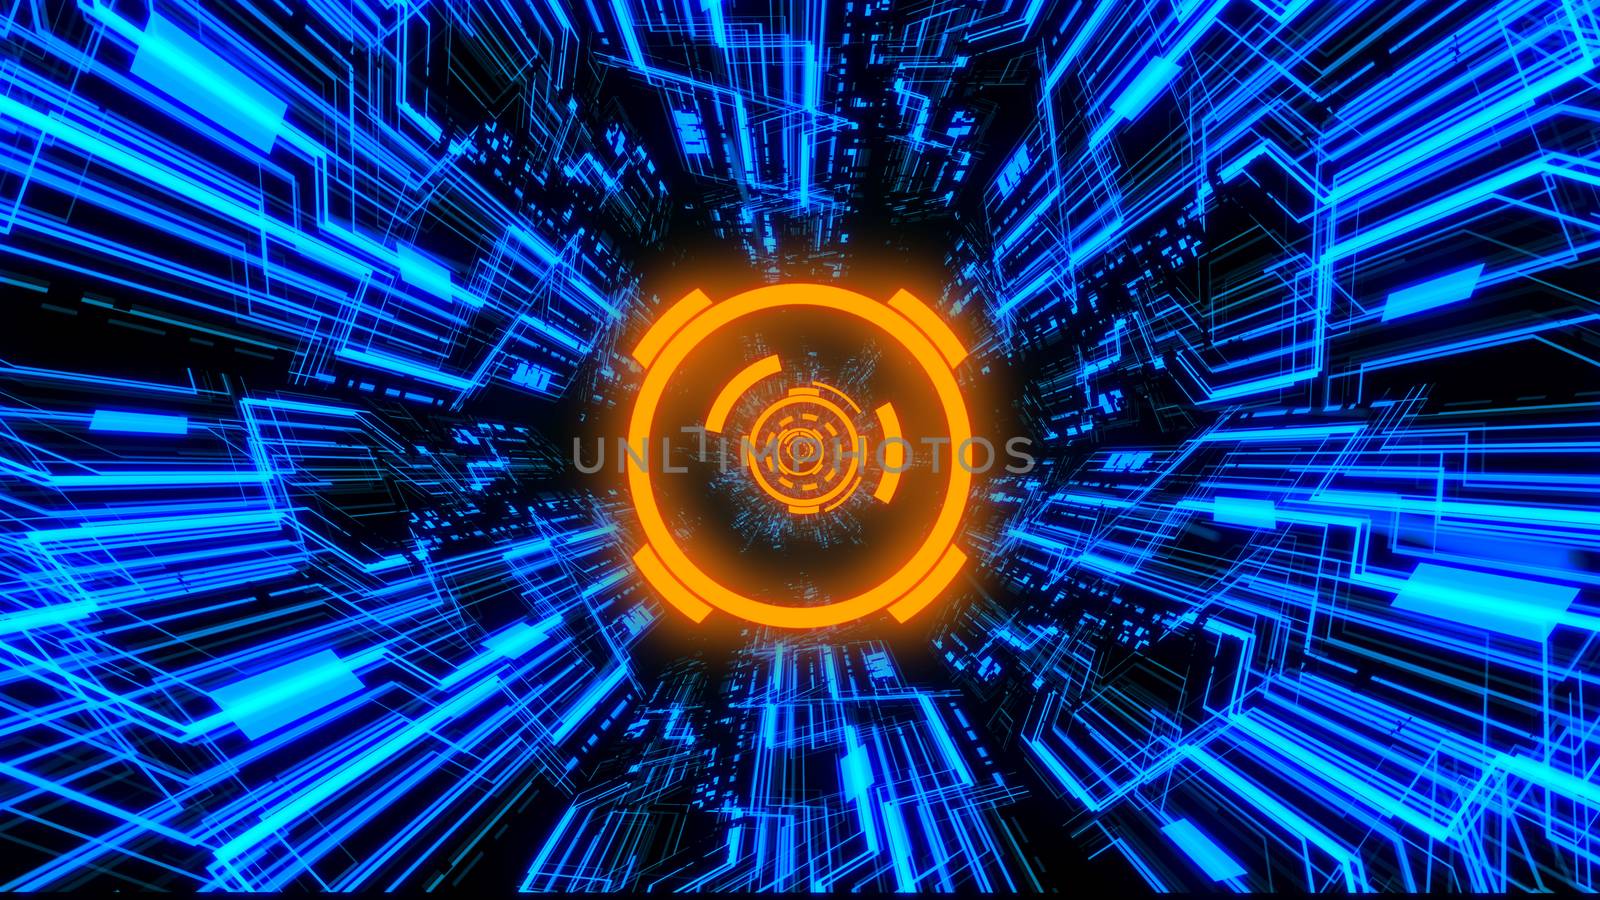 3D Digital Circuit System Tunnels and Waves with Digital Circles in the middle in Orange-Blue color theme Ver.1 by ariya23156